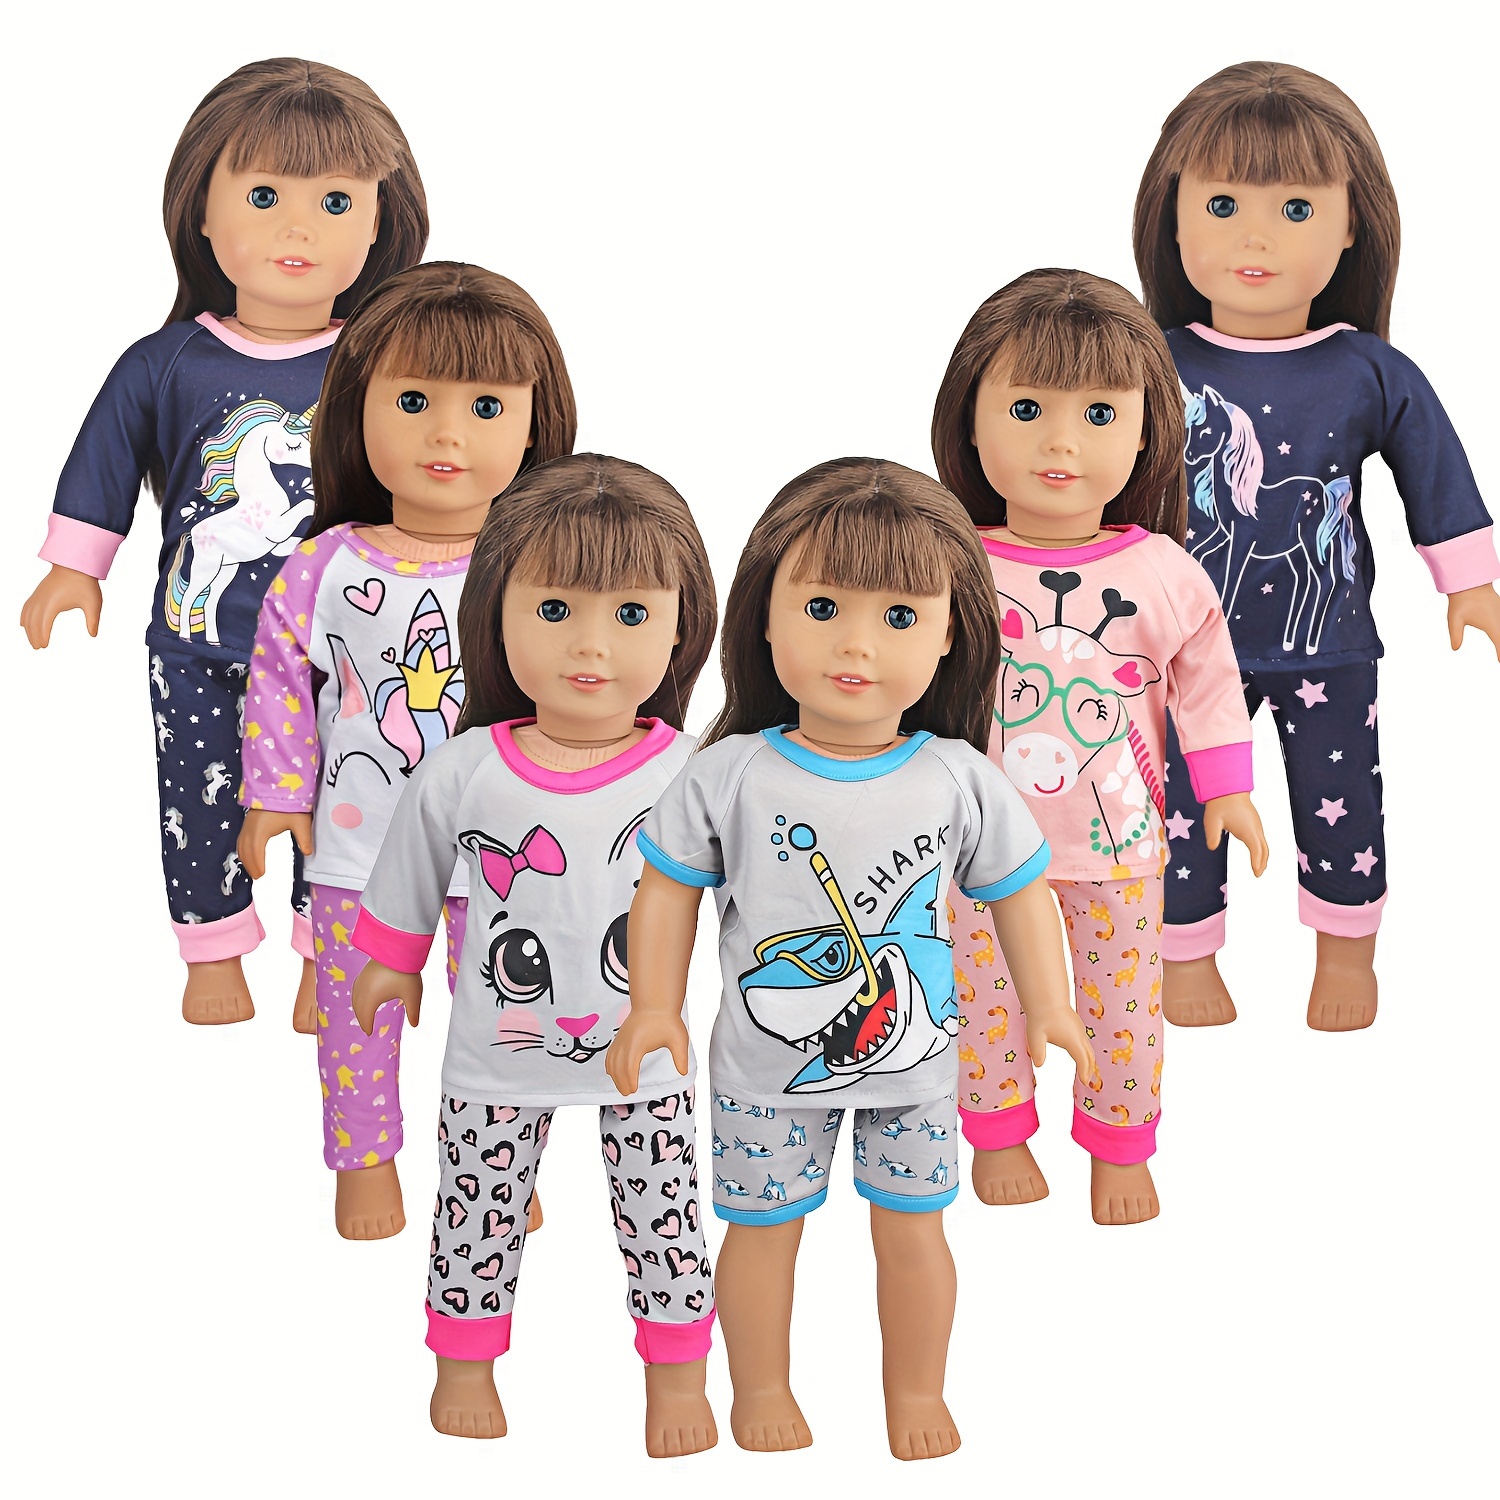 

A Set Of Cute Cartoon Unicorn, Cat, And Shark Pajamas + Pants Suitable For 18in Doll, Doll And Shoes Not Included